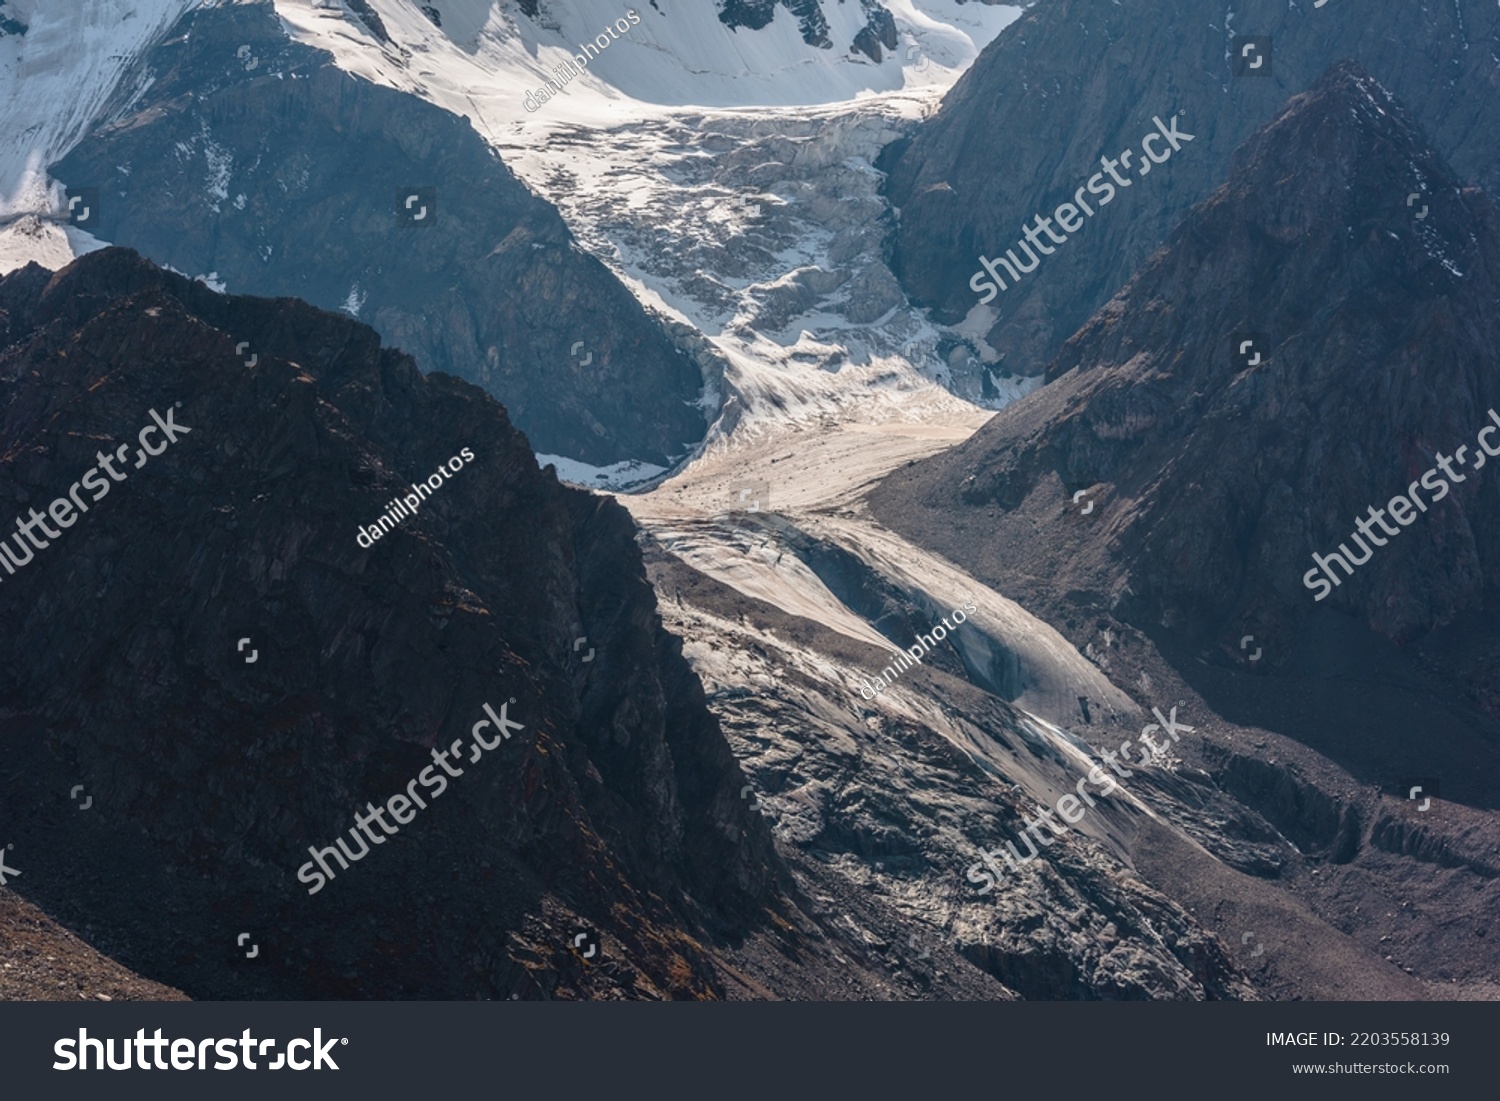 Atmospheric landscape with large snow mountain range in sunny day. Glacier and icefall in bright sun among sharp rocks. Awesome mountain view to high snowy mountains. Sunlit beautiful icefall close-up #2203558139